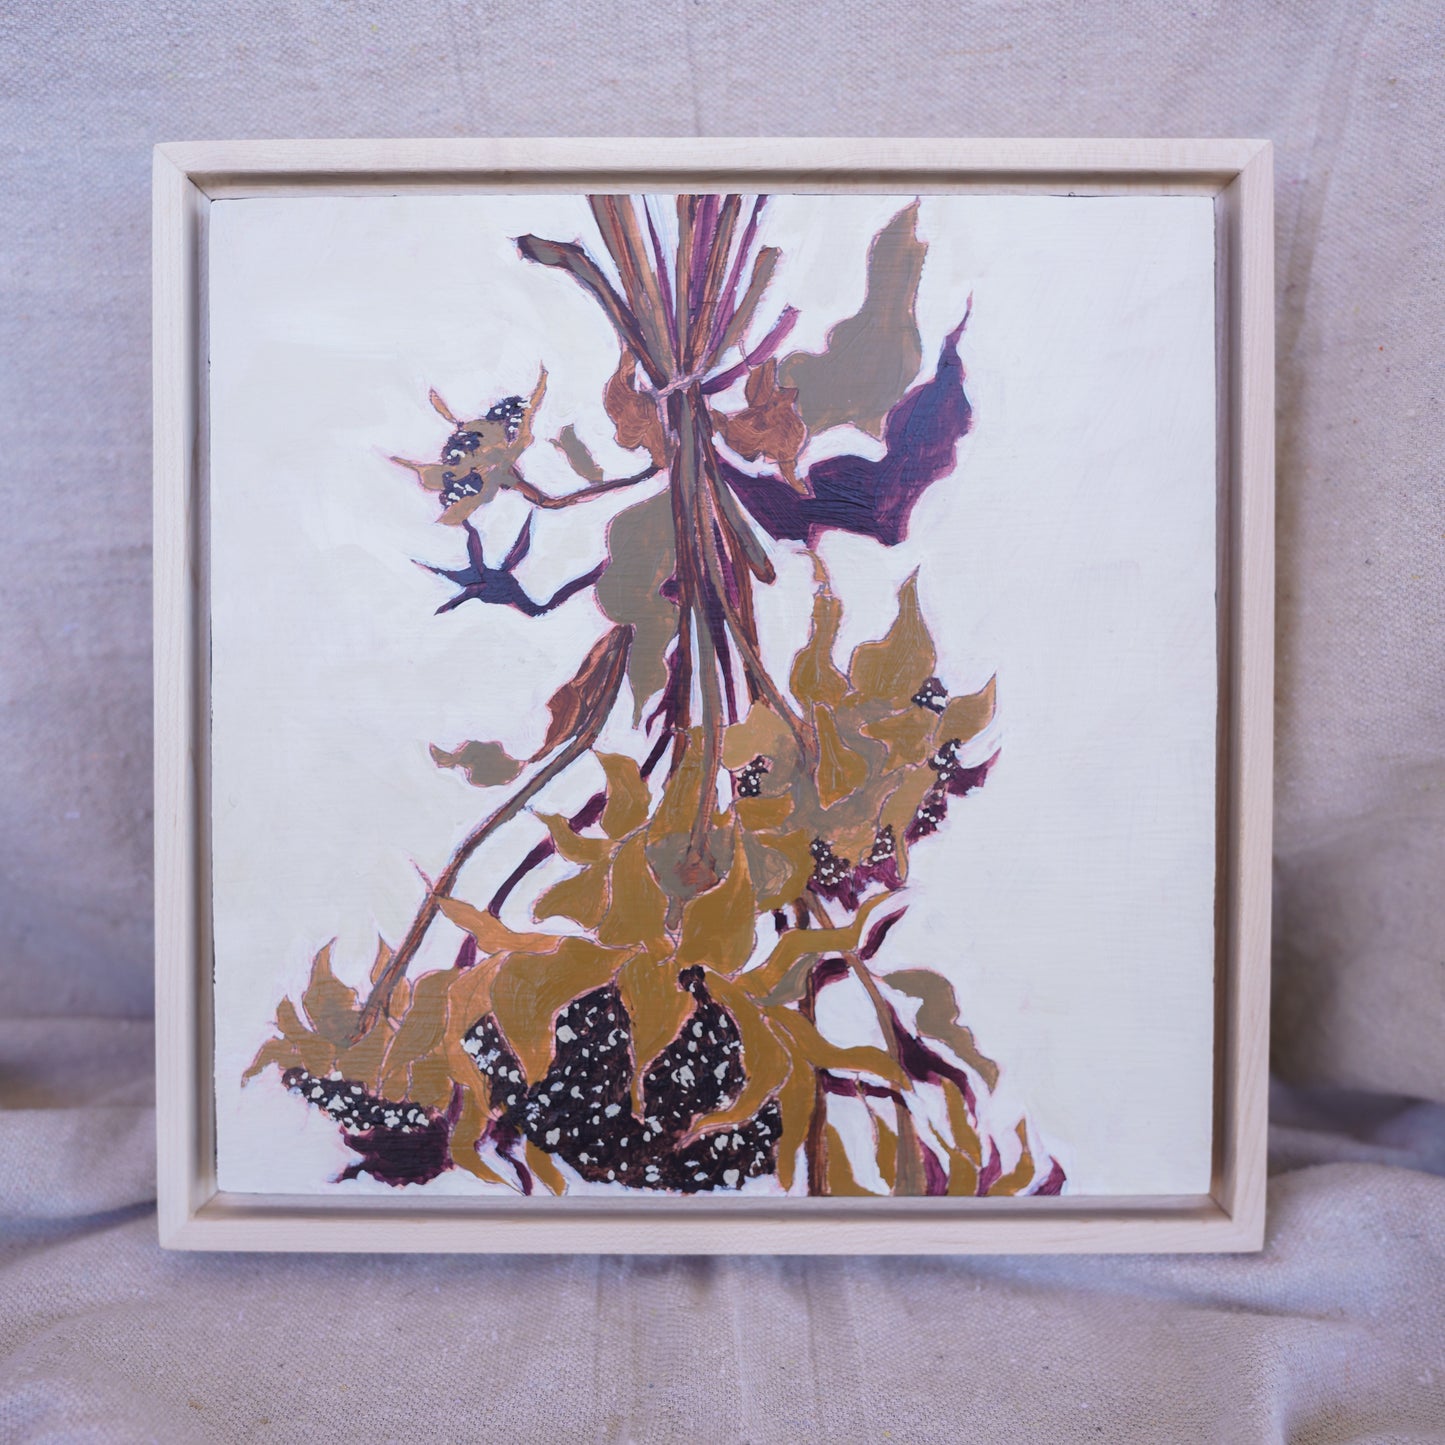 Original acrylic painting of dried sunflowers with a cream background in a natural maple floater frame